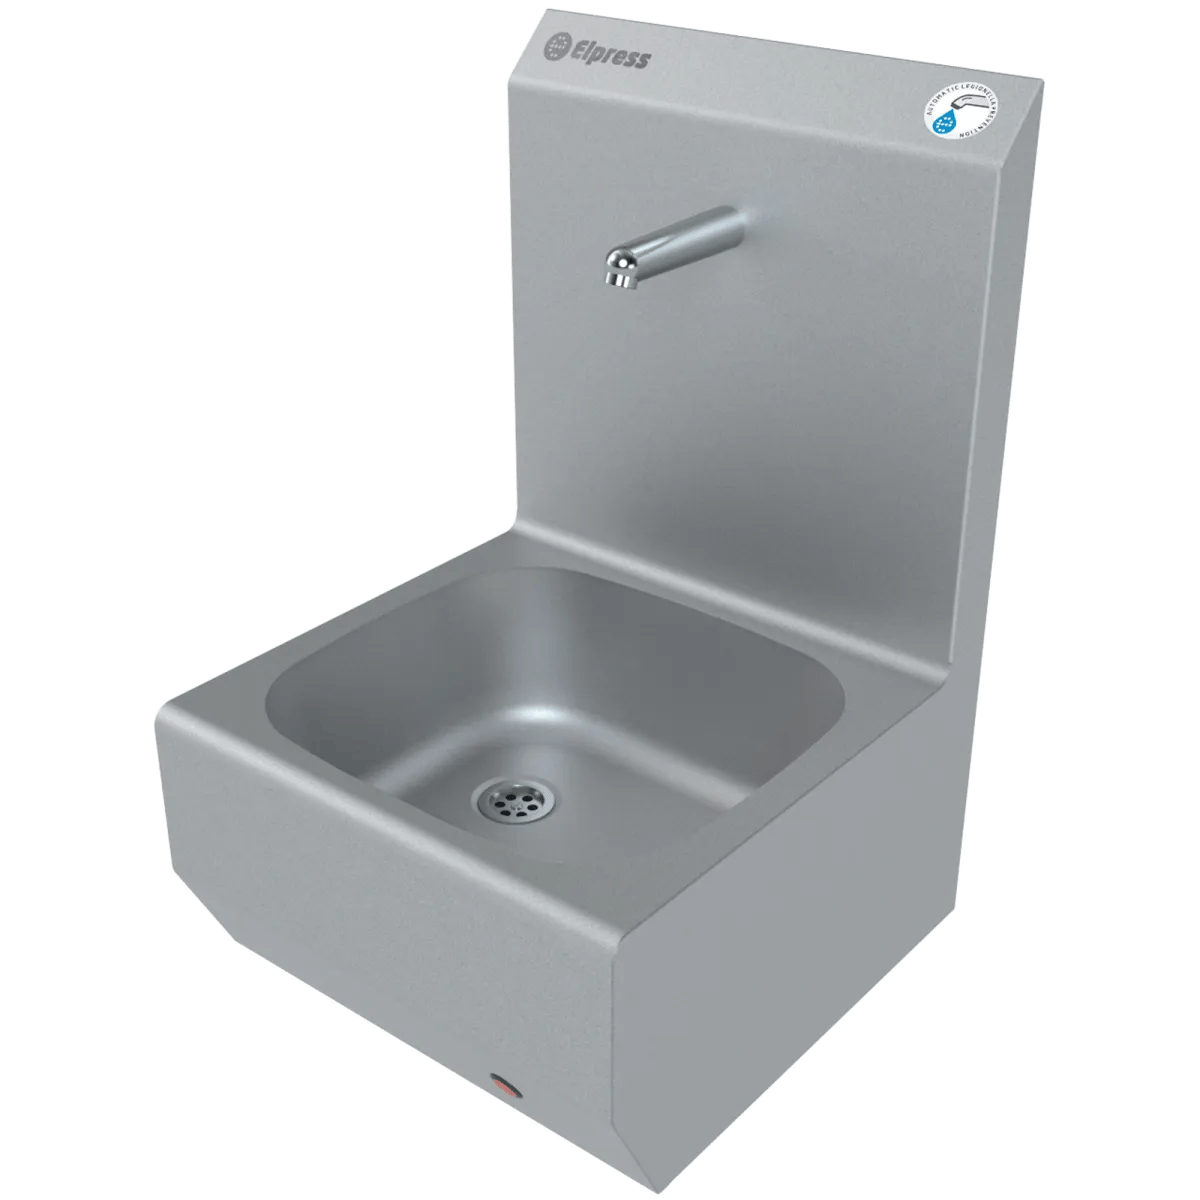 Stainless steel sensor-operated wash basins